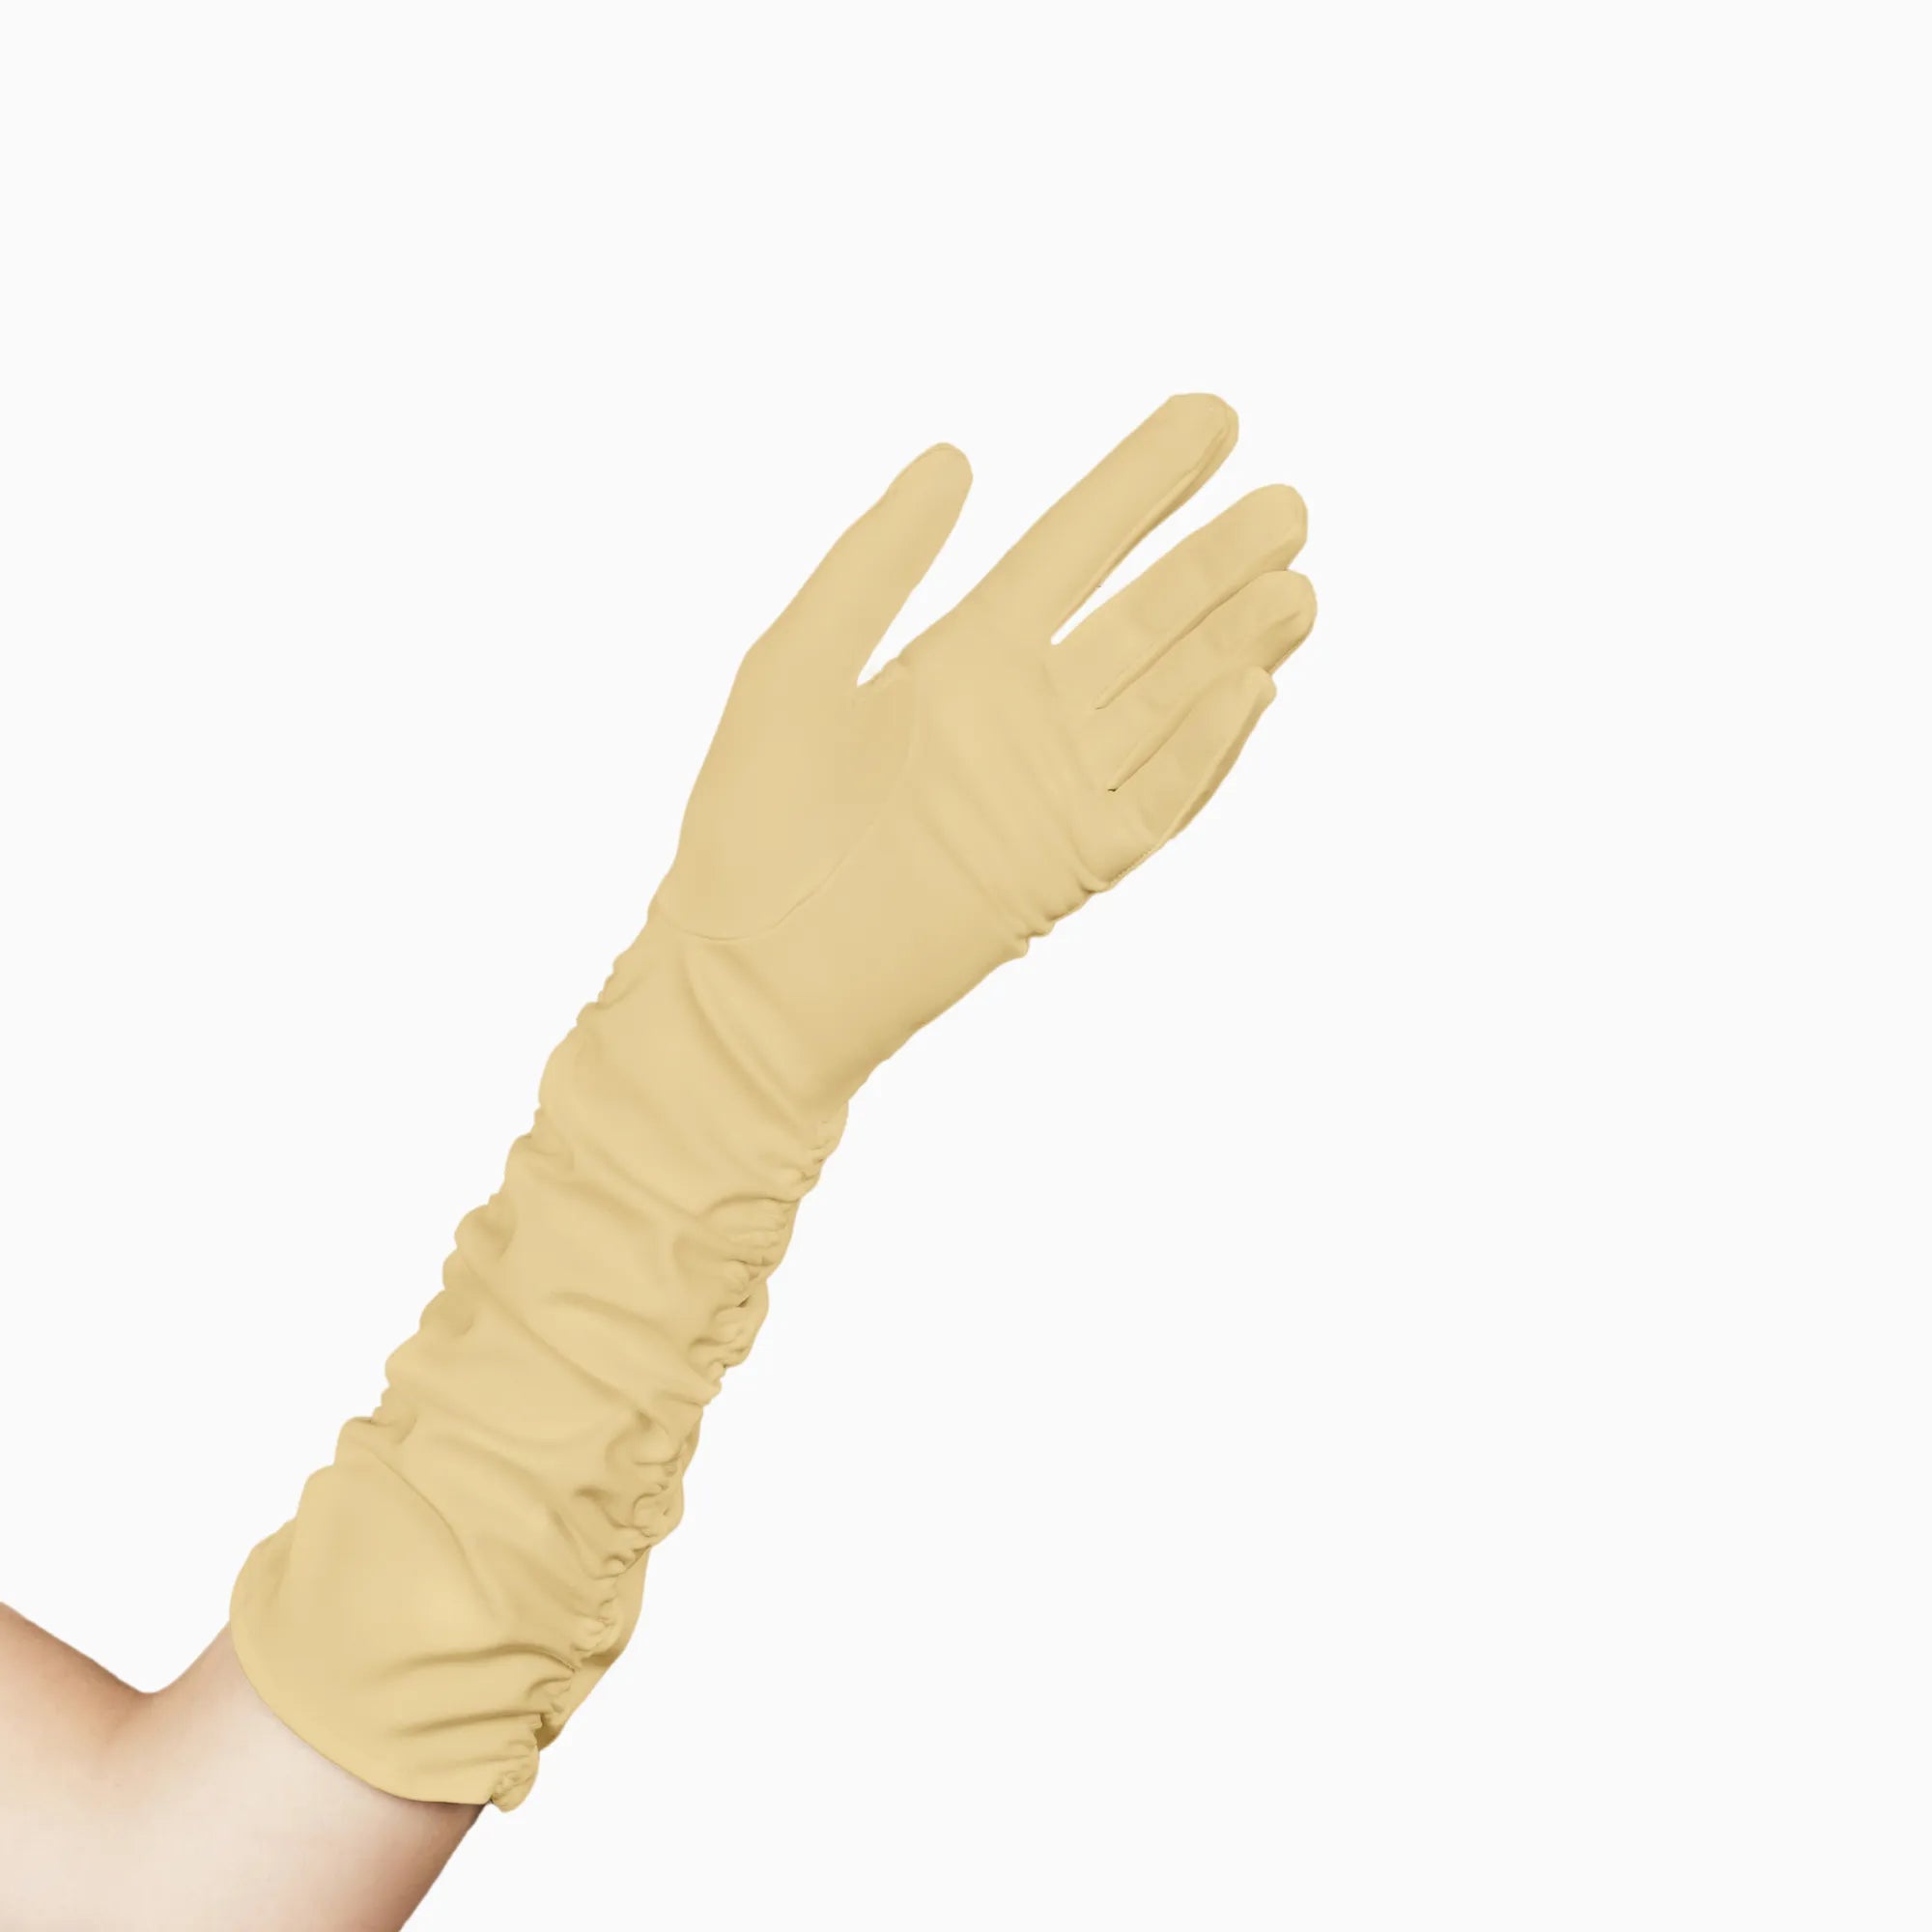 Stephanie, elbow length long gloves in yellow with an open palm.